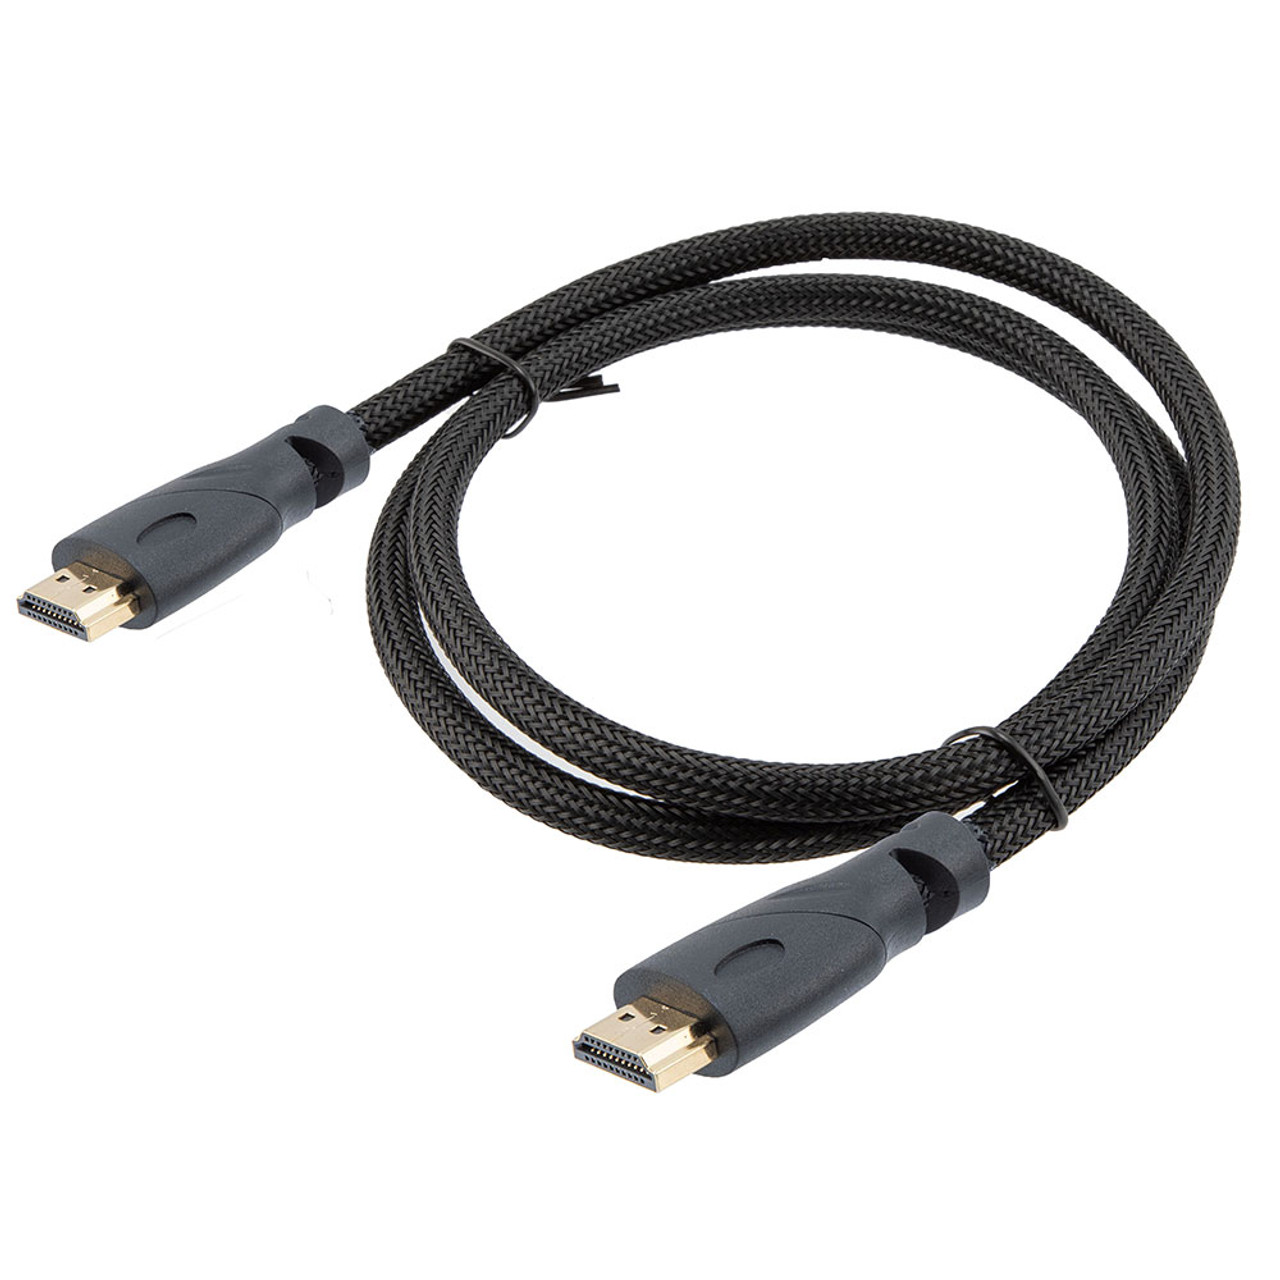 NavePoint HDMI 2.0 Male to Male Braided Cable, PVC with Nylon, Black, PVC shell, Supports 4K @ 60Hz, 1M 